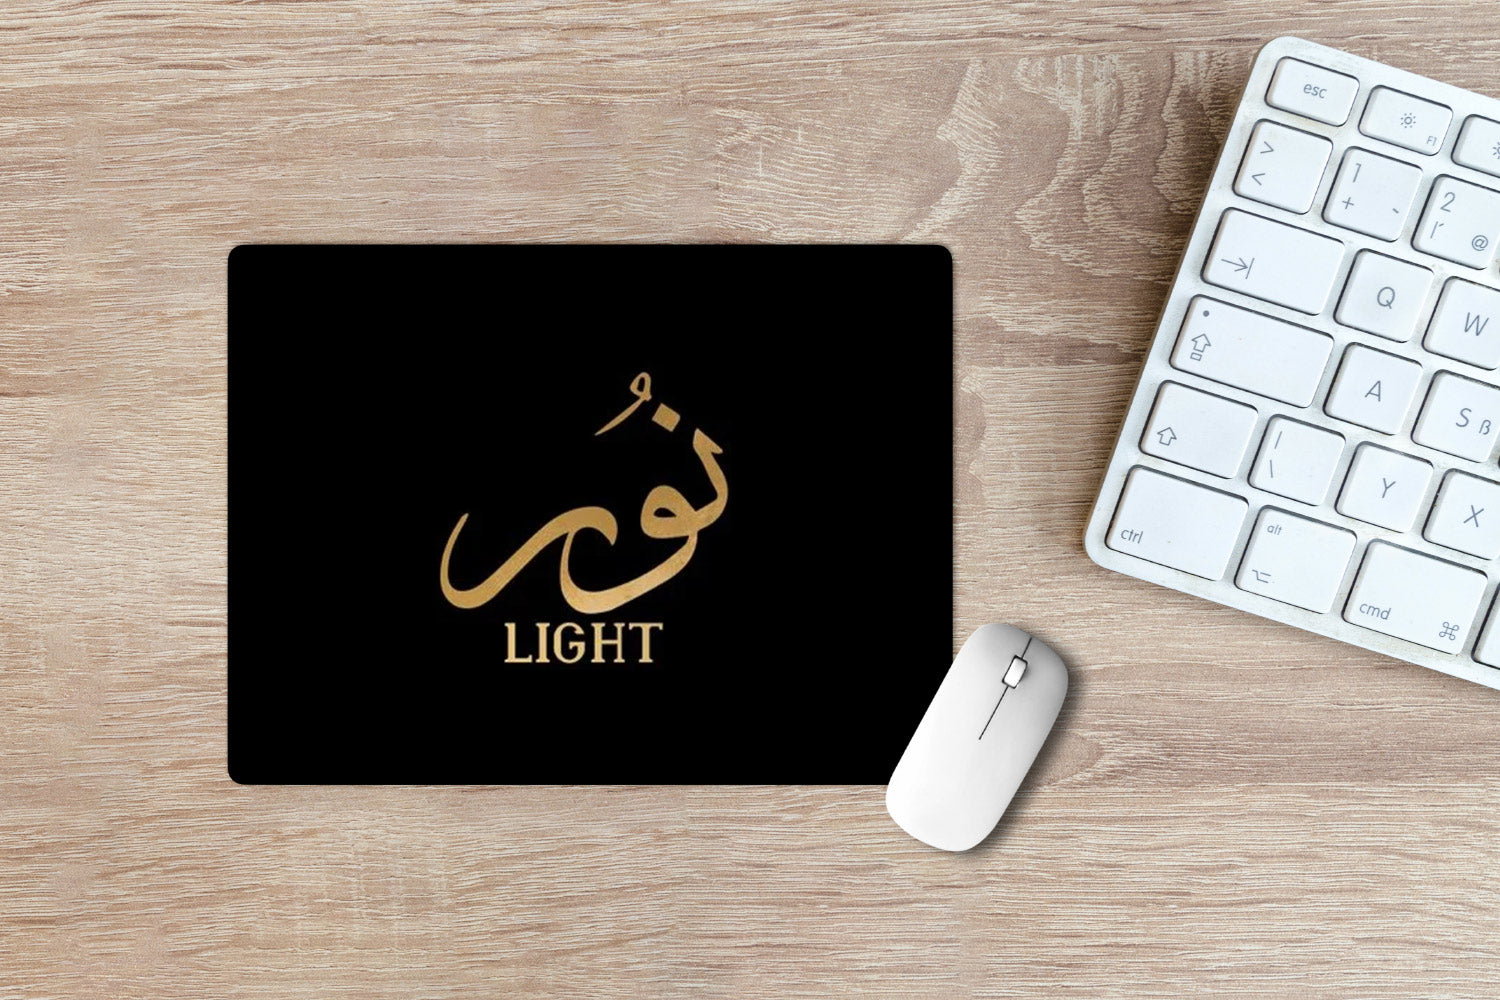 Light' Printed Non-Slip Rubber Base Mouse Pad for Laptop, PC, Computer.